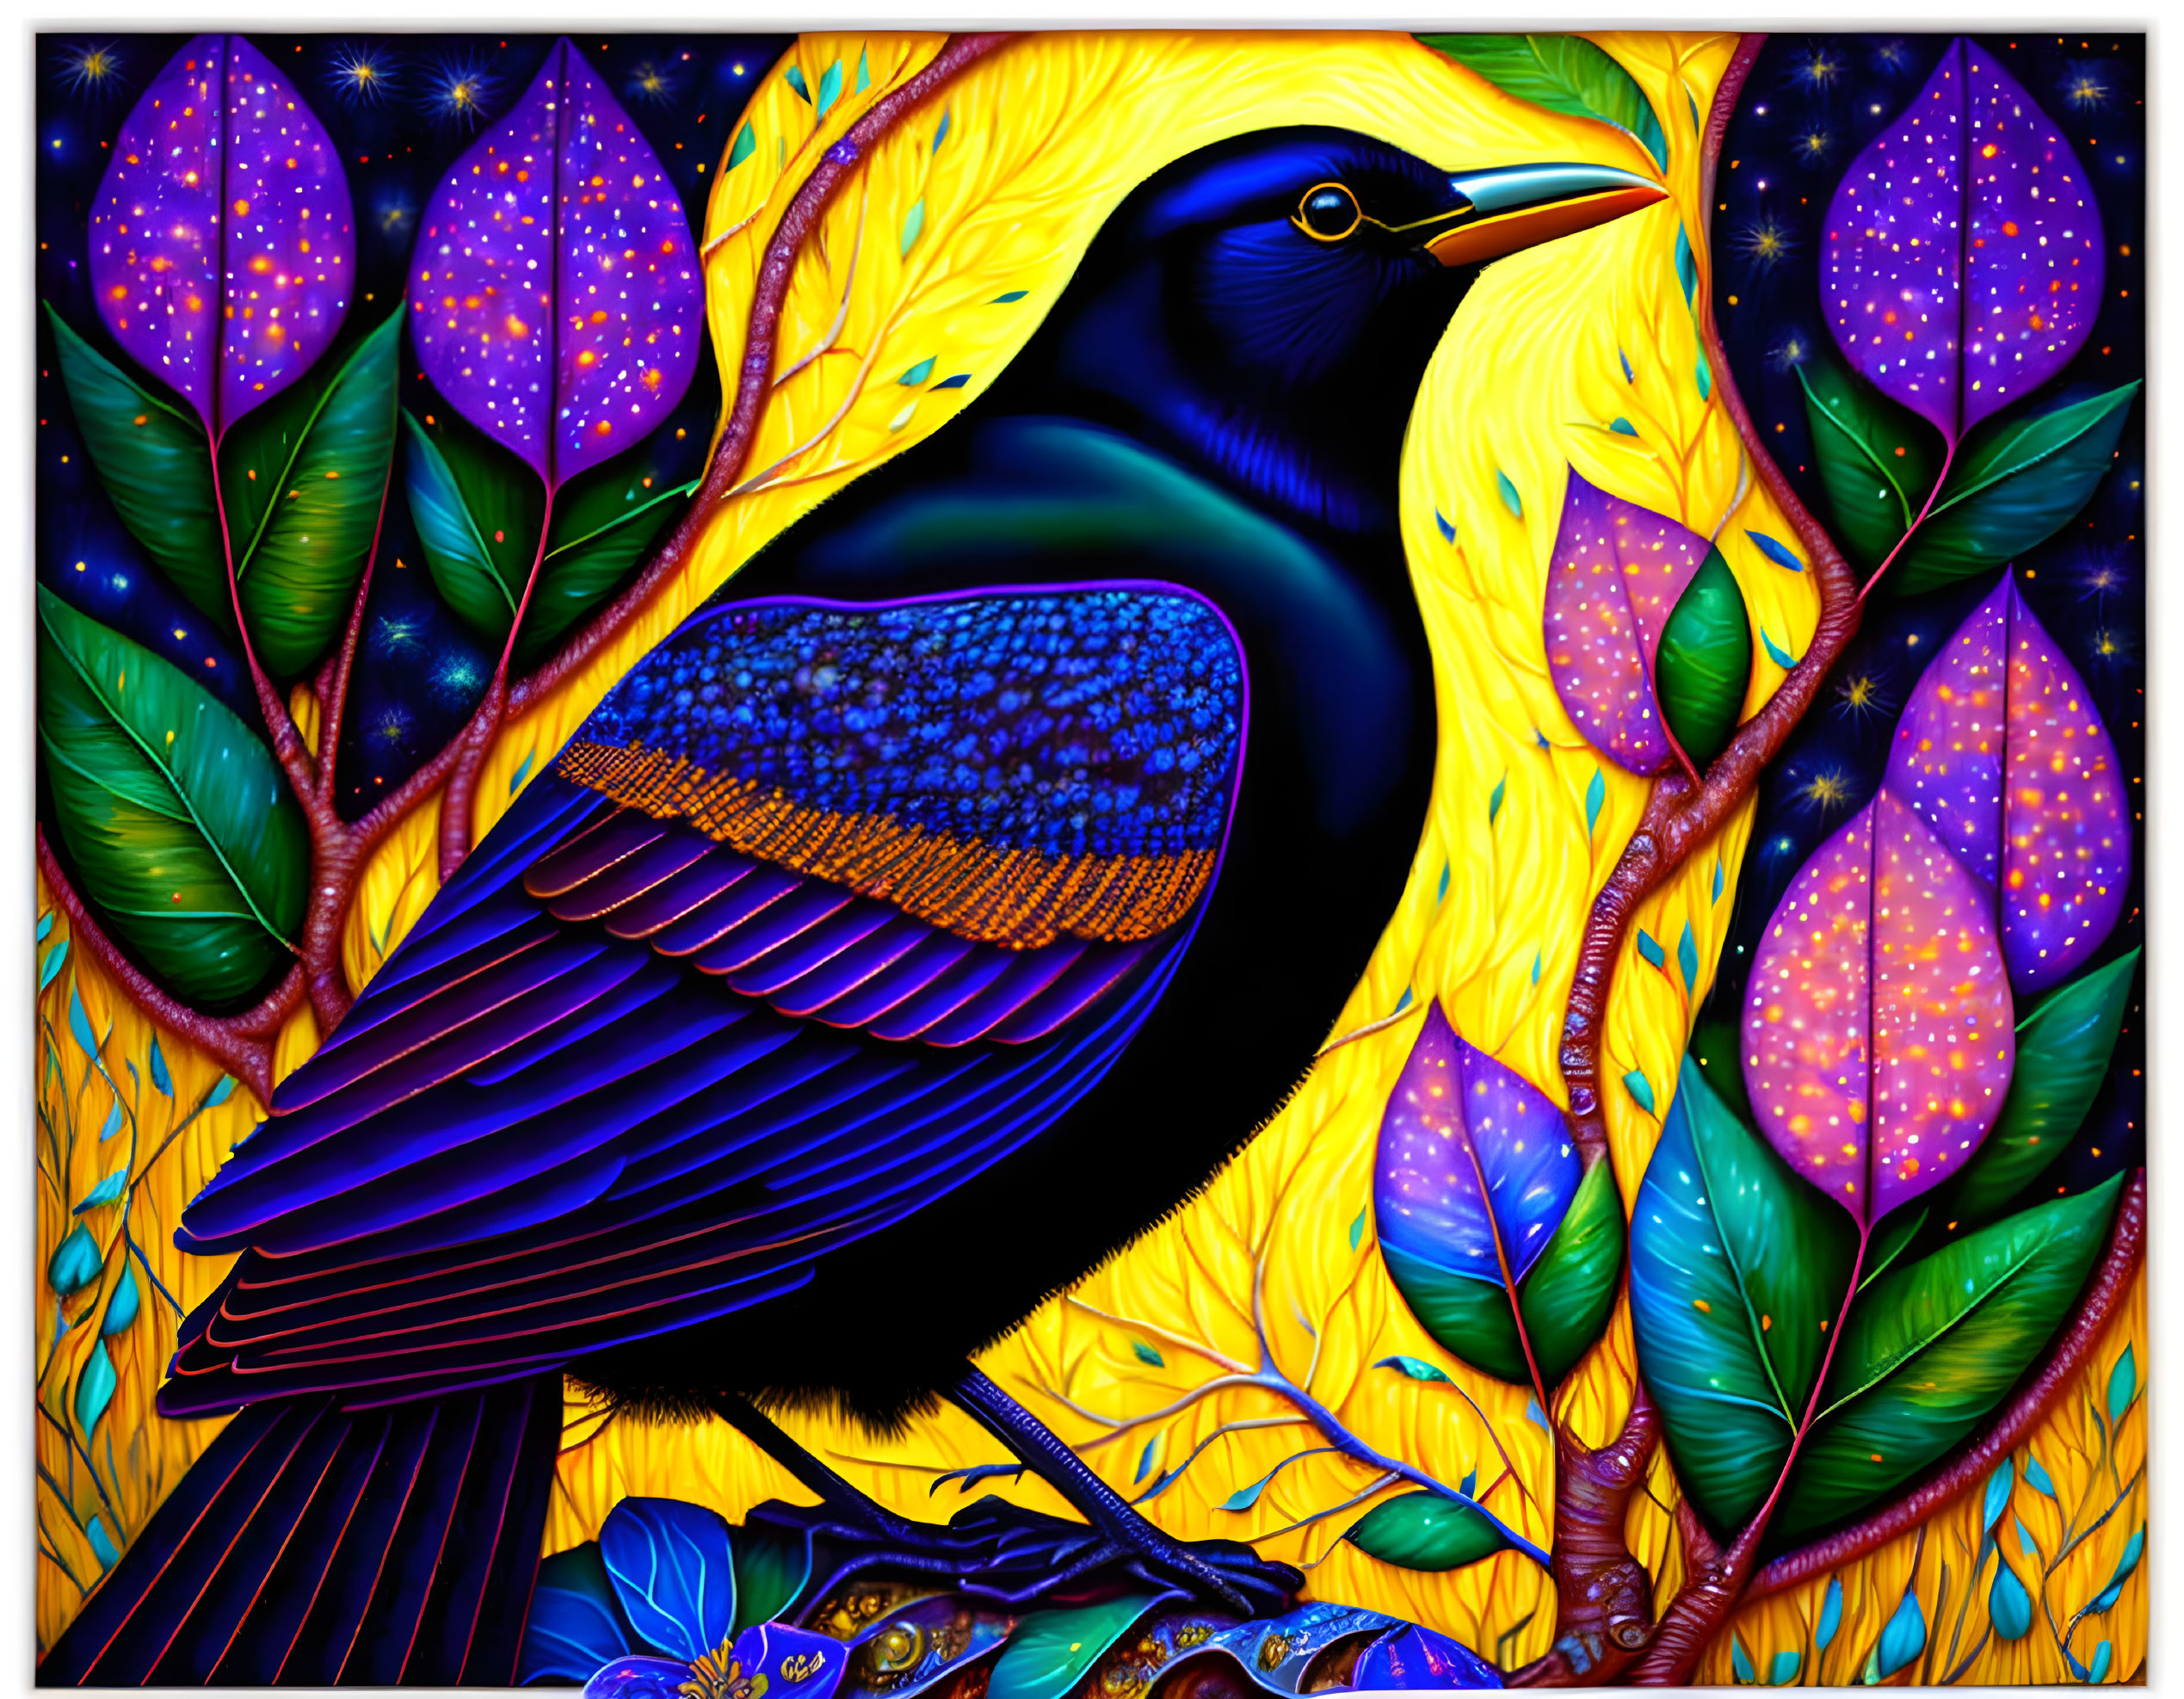 Colorful Blackbird Illustration Among Intricate Feather Patterns